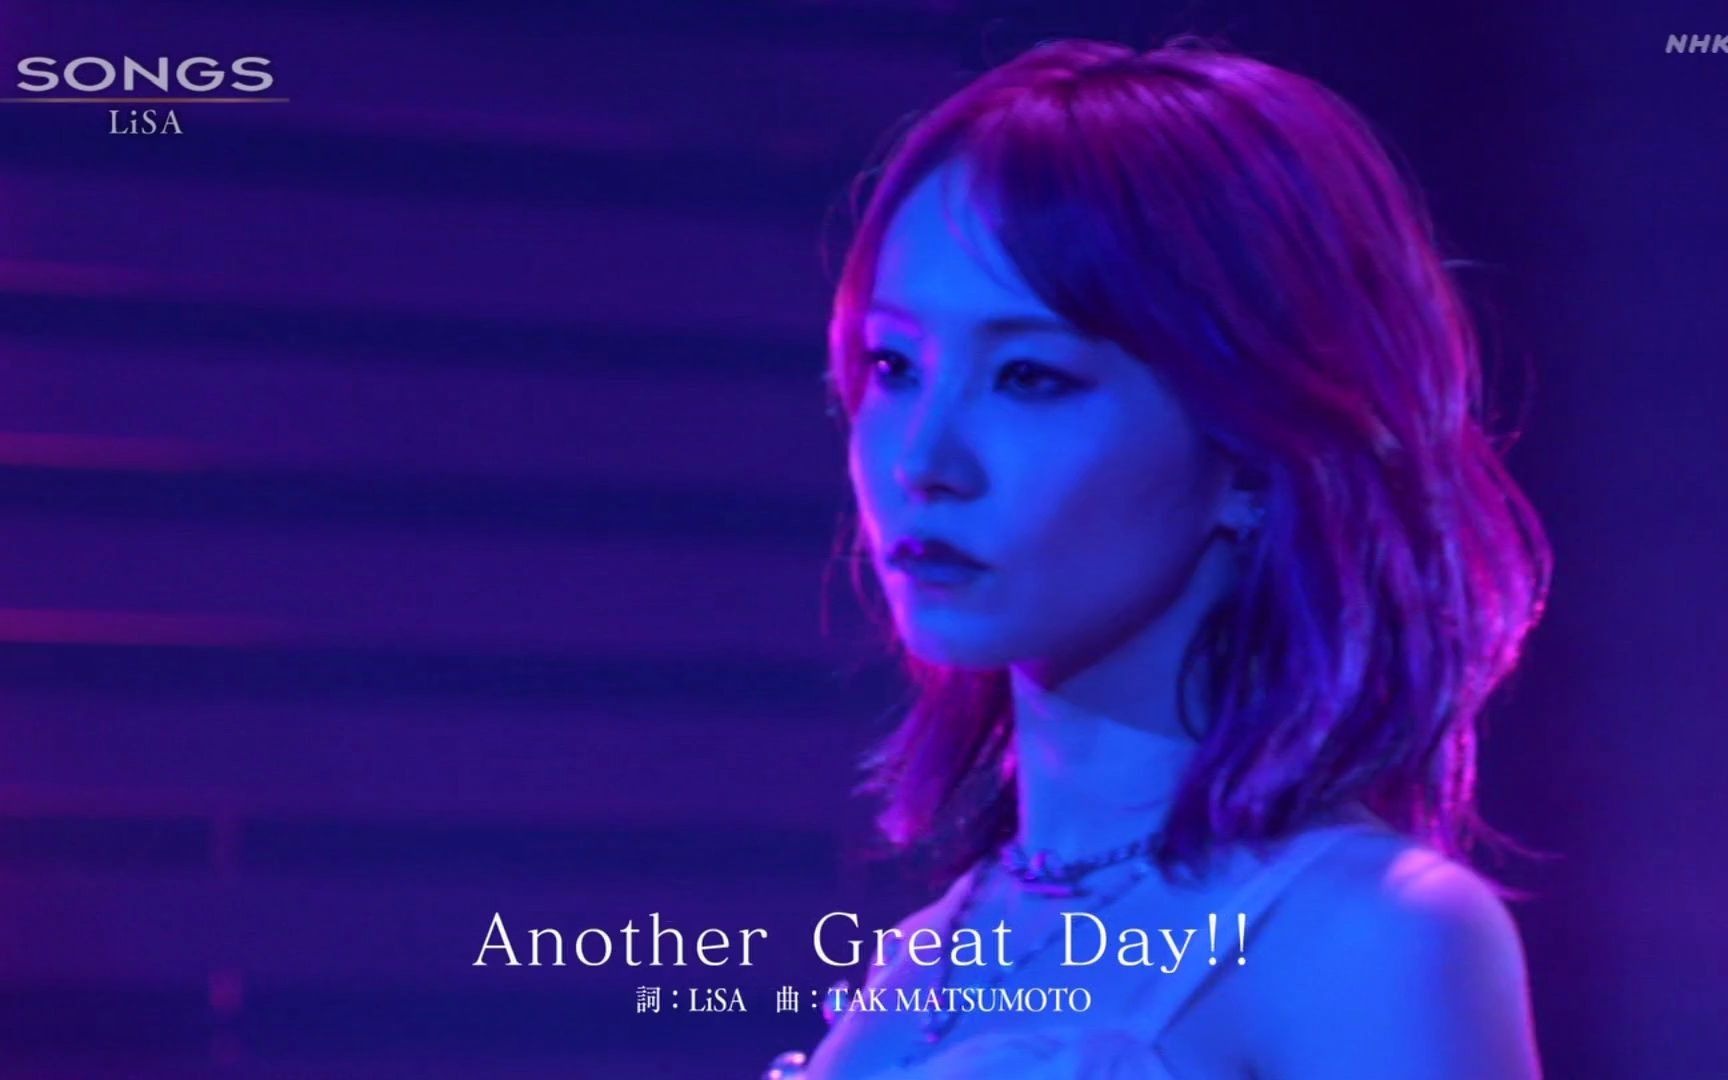 LiSA ピンクが星いのっ☆ペンライト ANOTHER GREAT DAY 